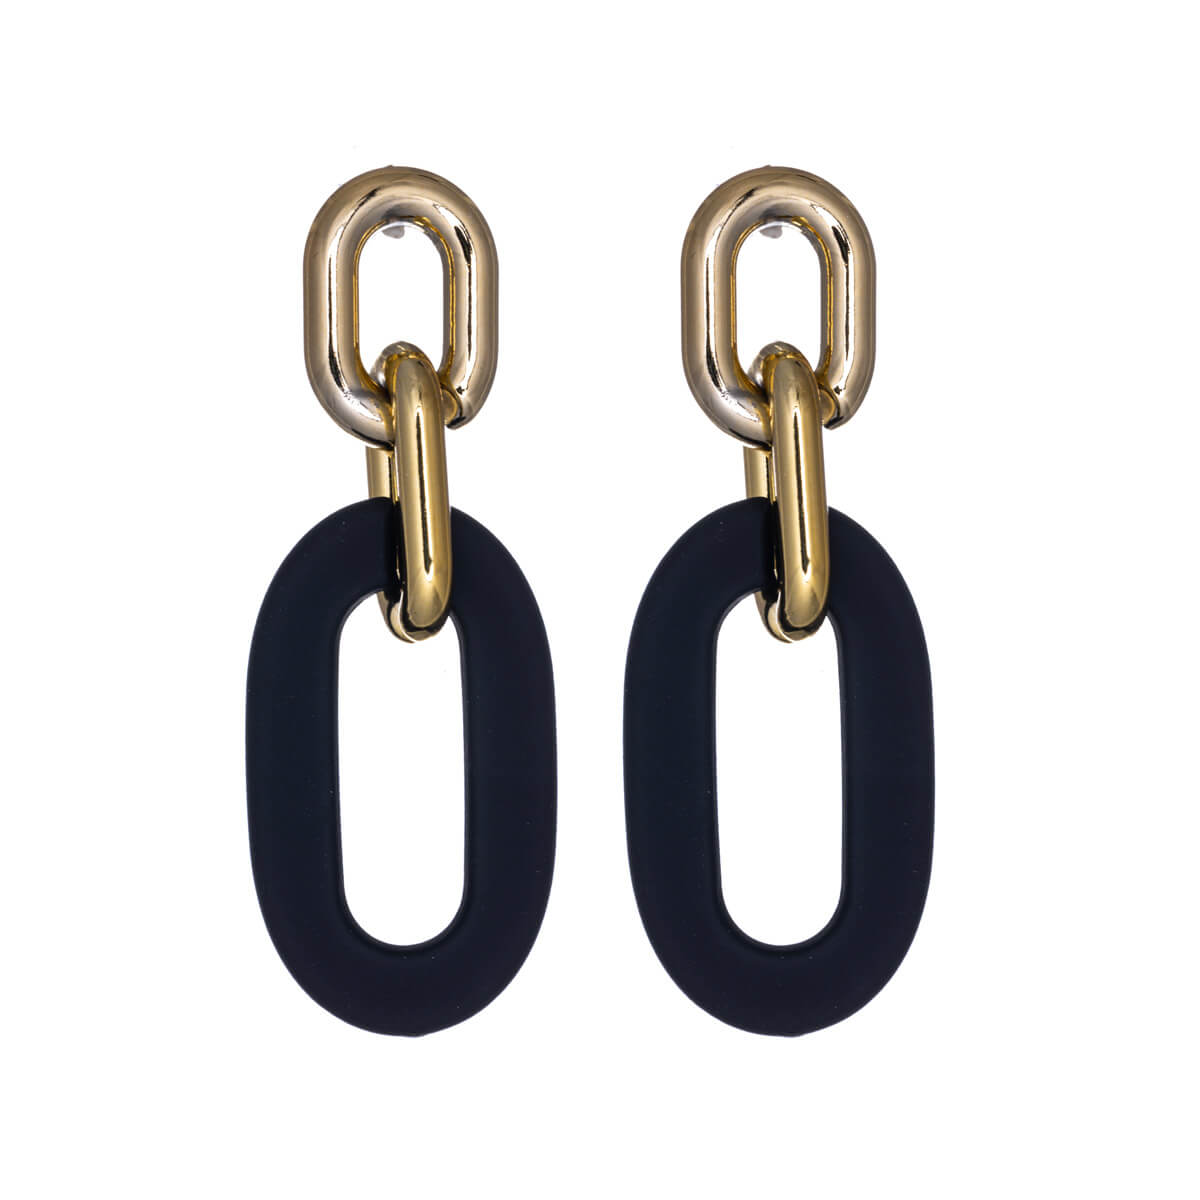 Hanging cable chain earrings